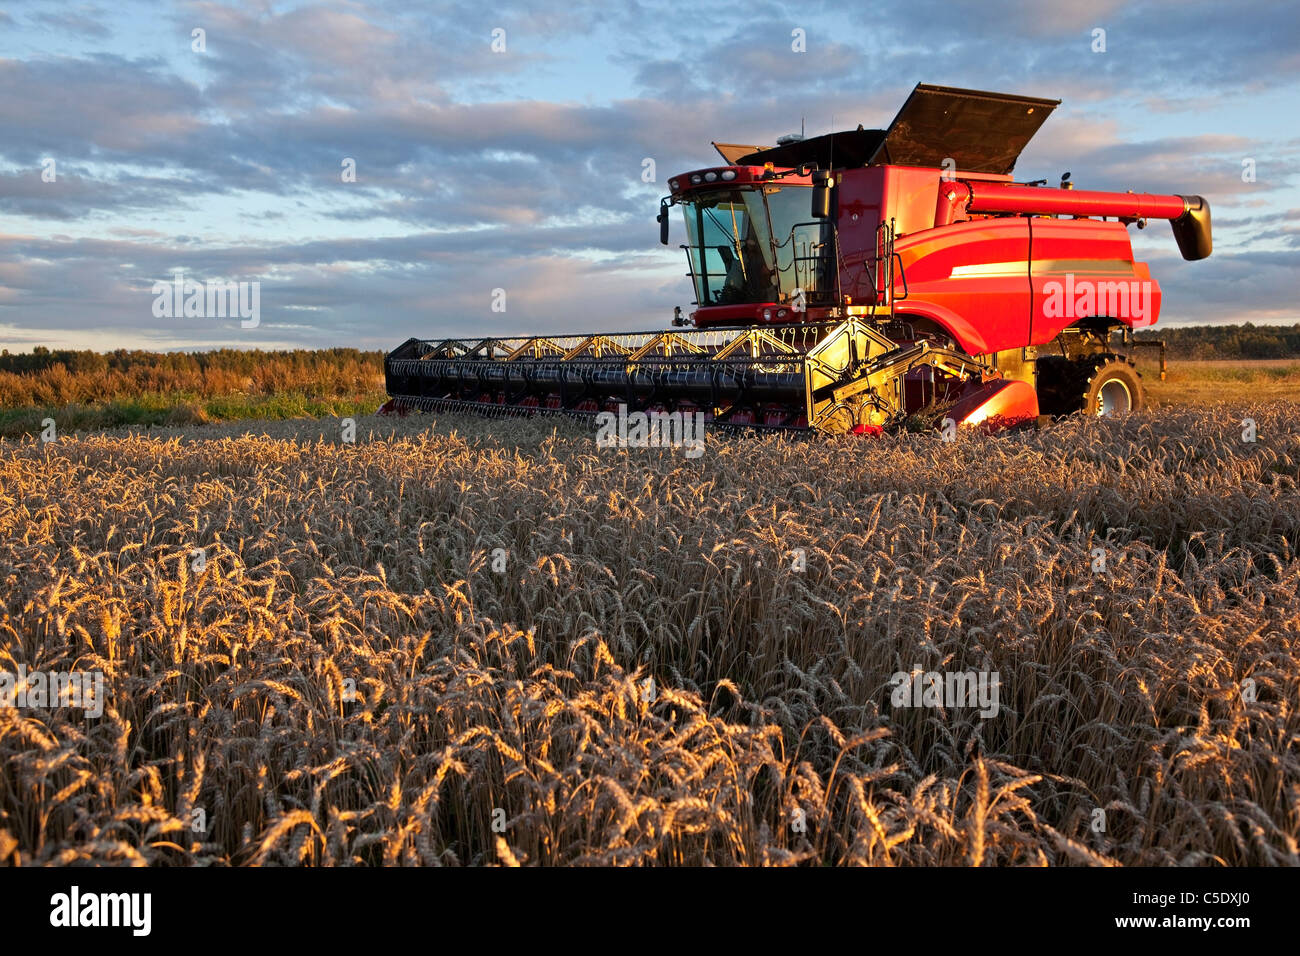 View of a combine harvester at work on agricultural field against blue sky and clouds Stock Photo